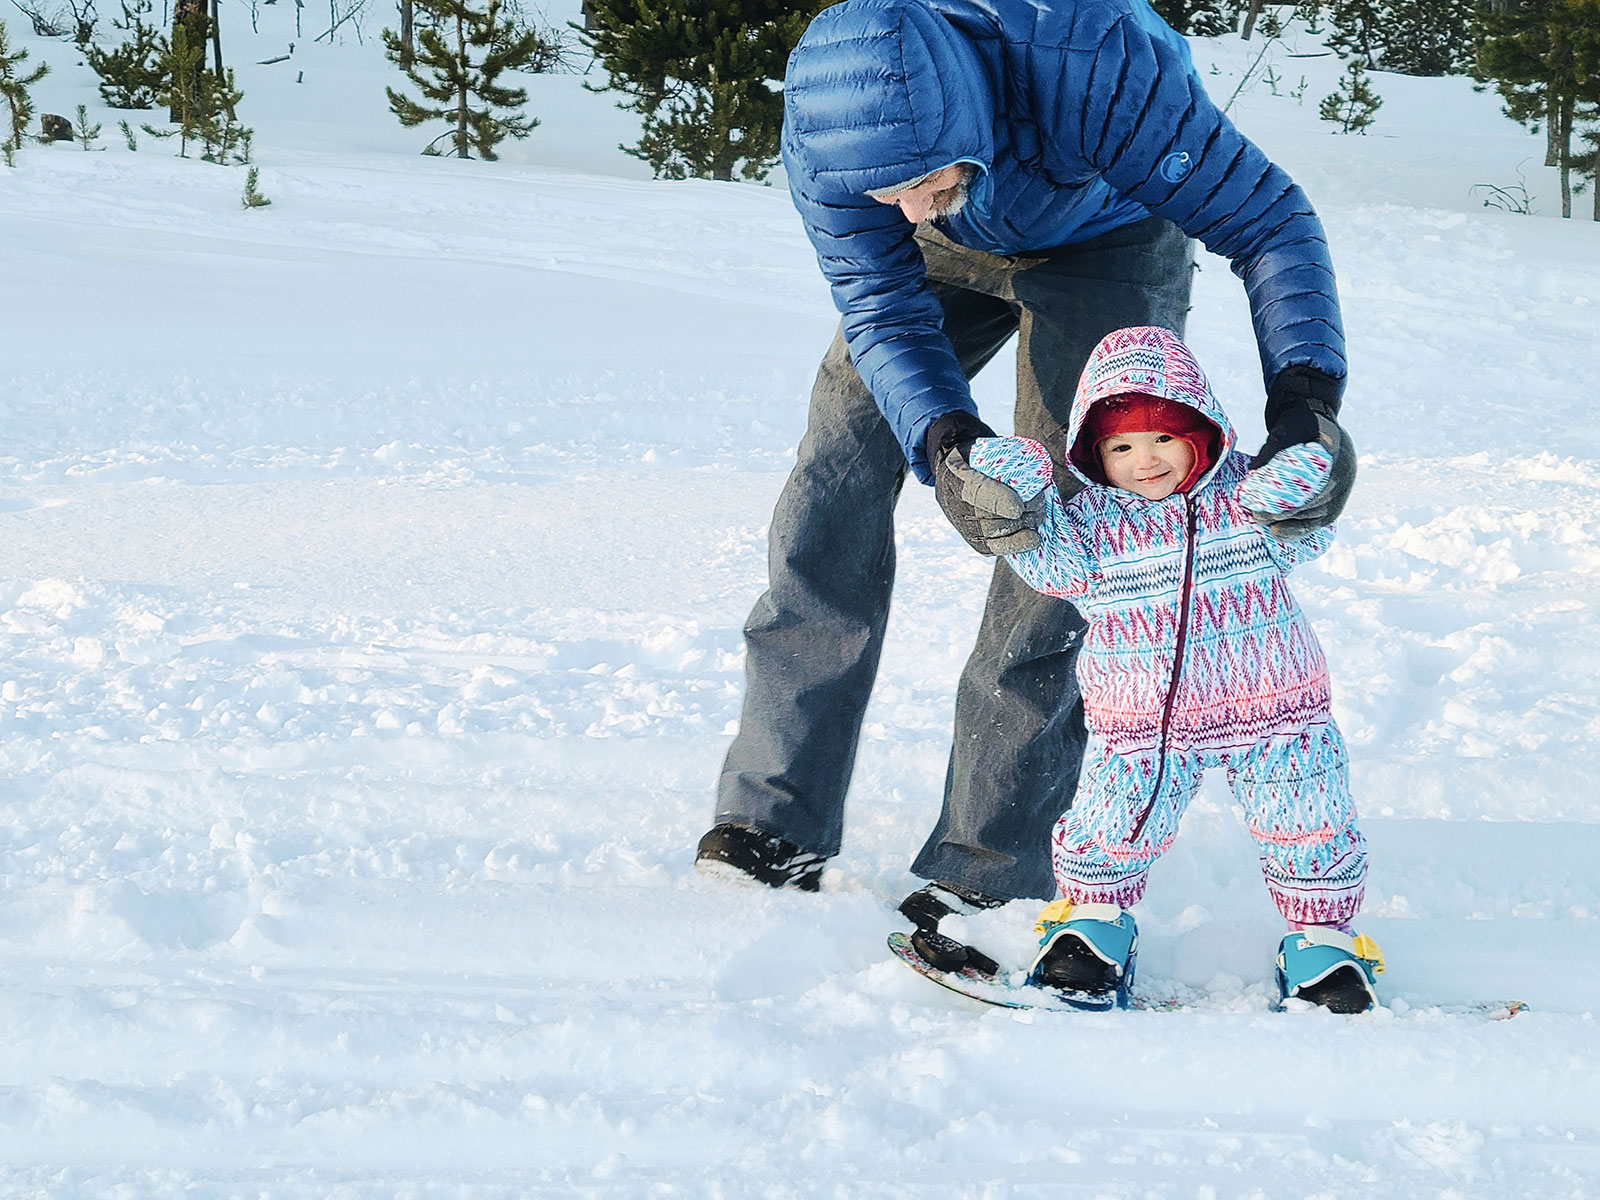 A dad helping his 1-year-old baby get used to gliding on a snowboard